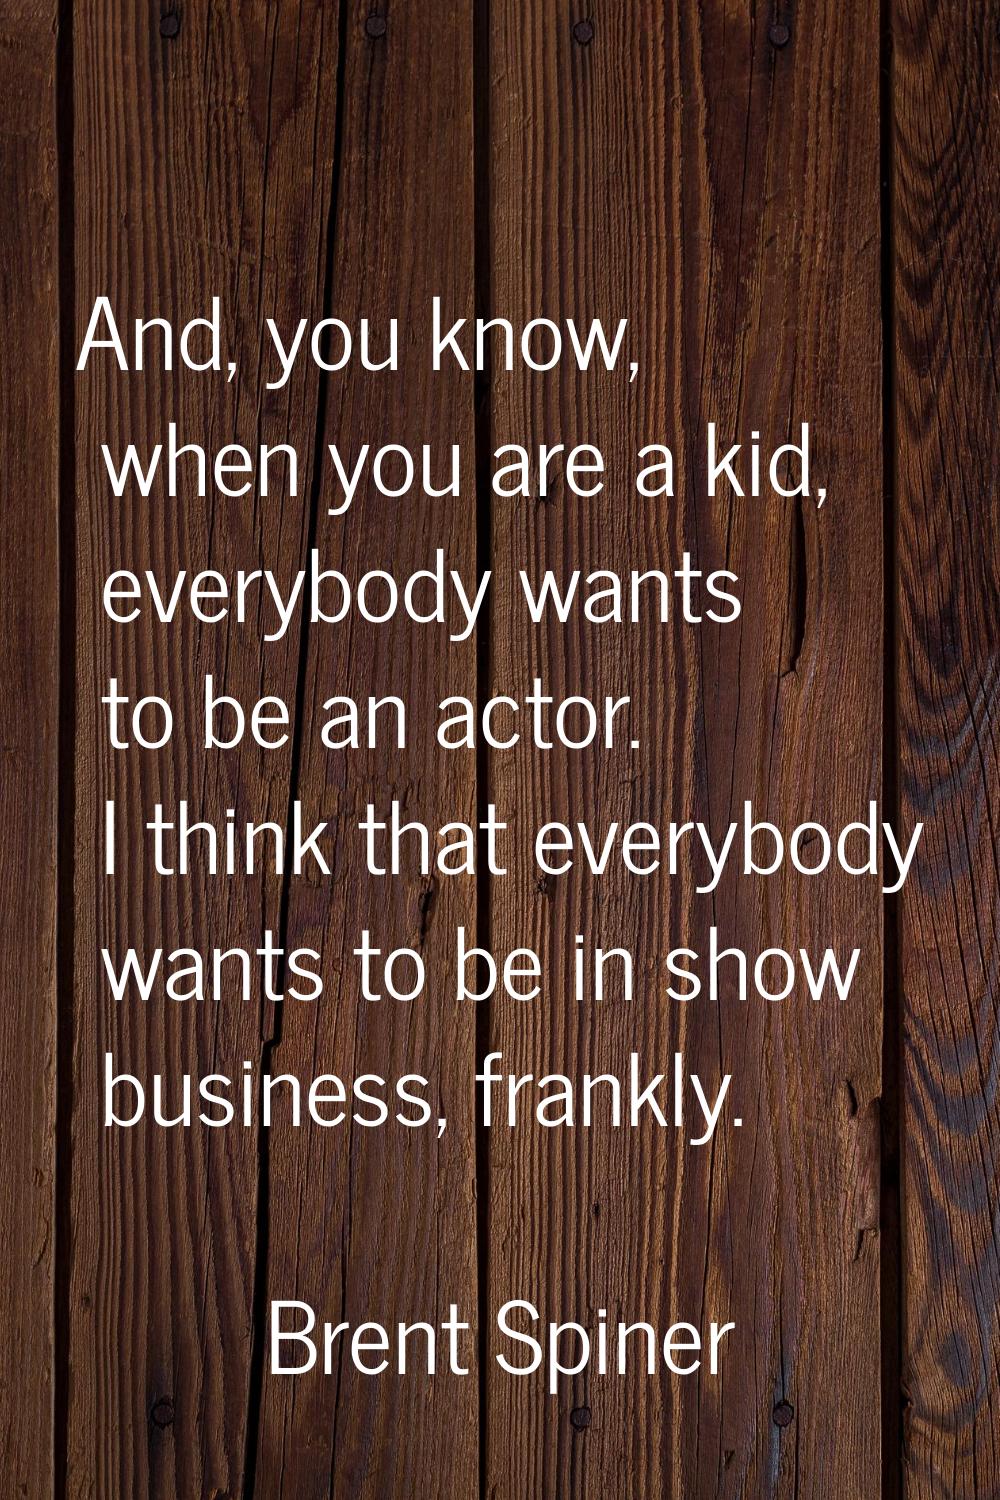 And, you know, when you are a kid, everybody wants to be an actor. I think that everybody wants to 